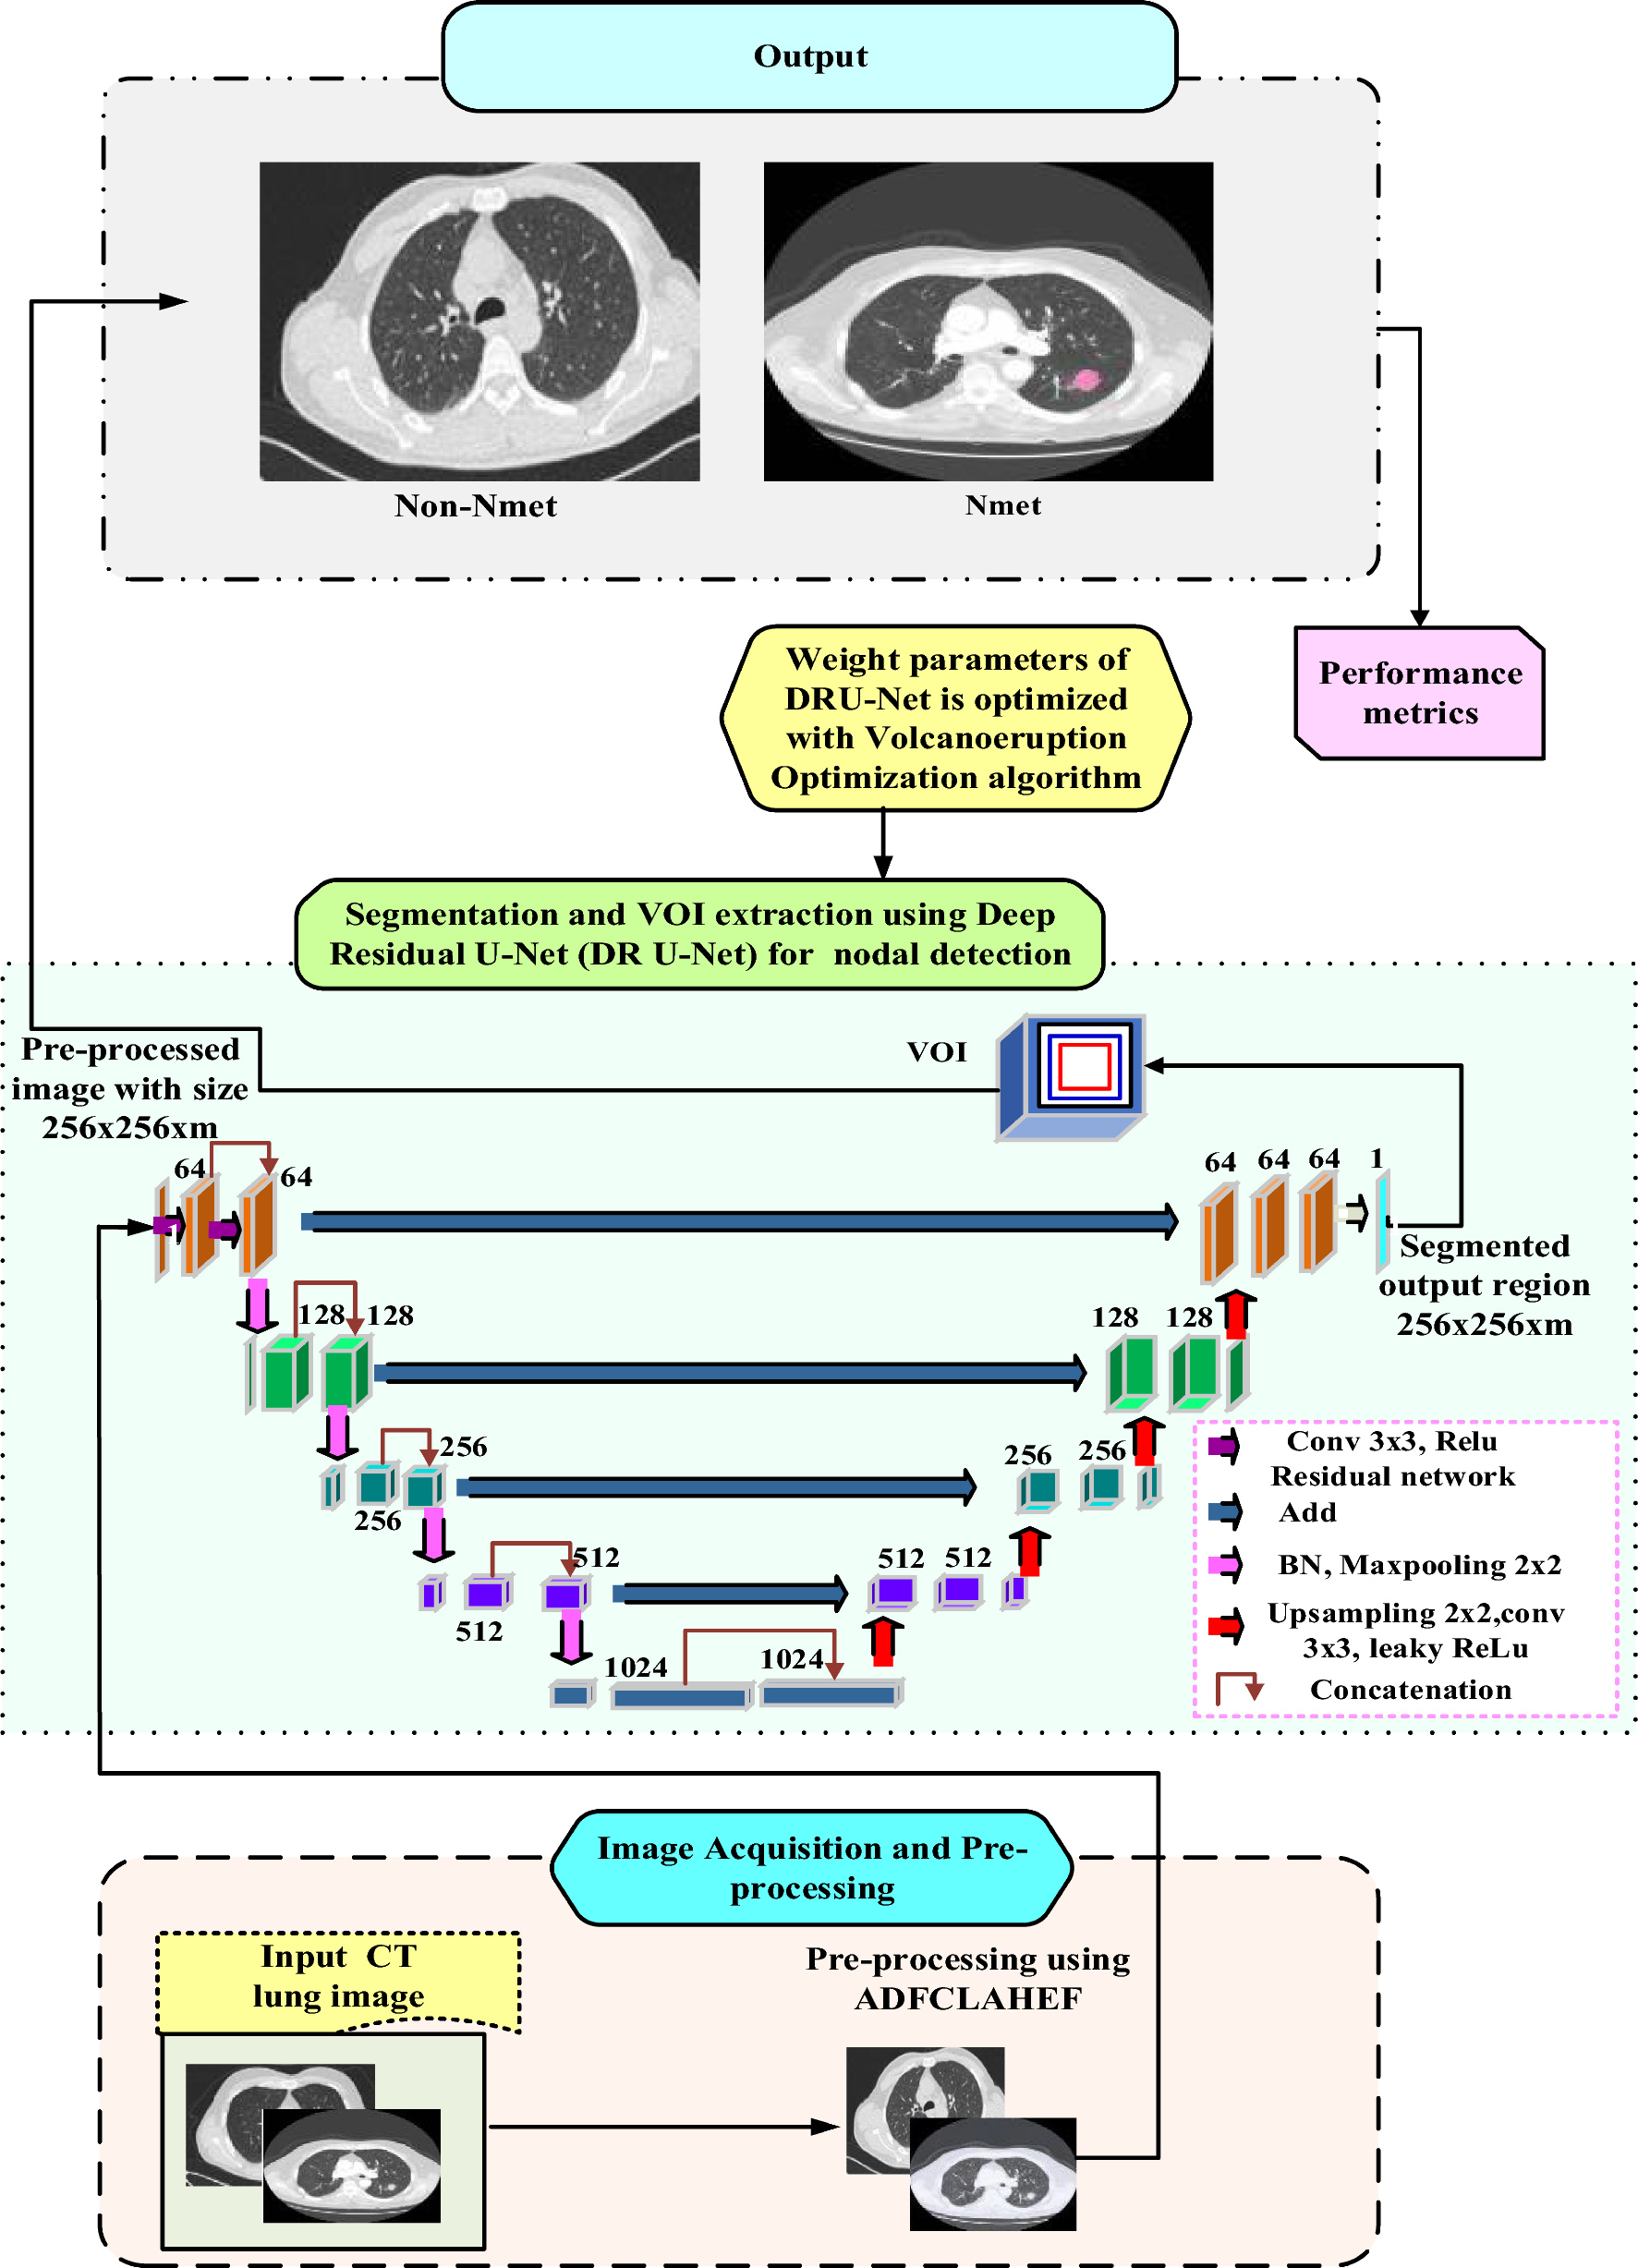 Deep volcanic residual U-Net for nodal metastasis (Nmet) identification from lung cancer